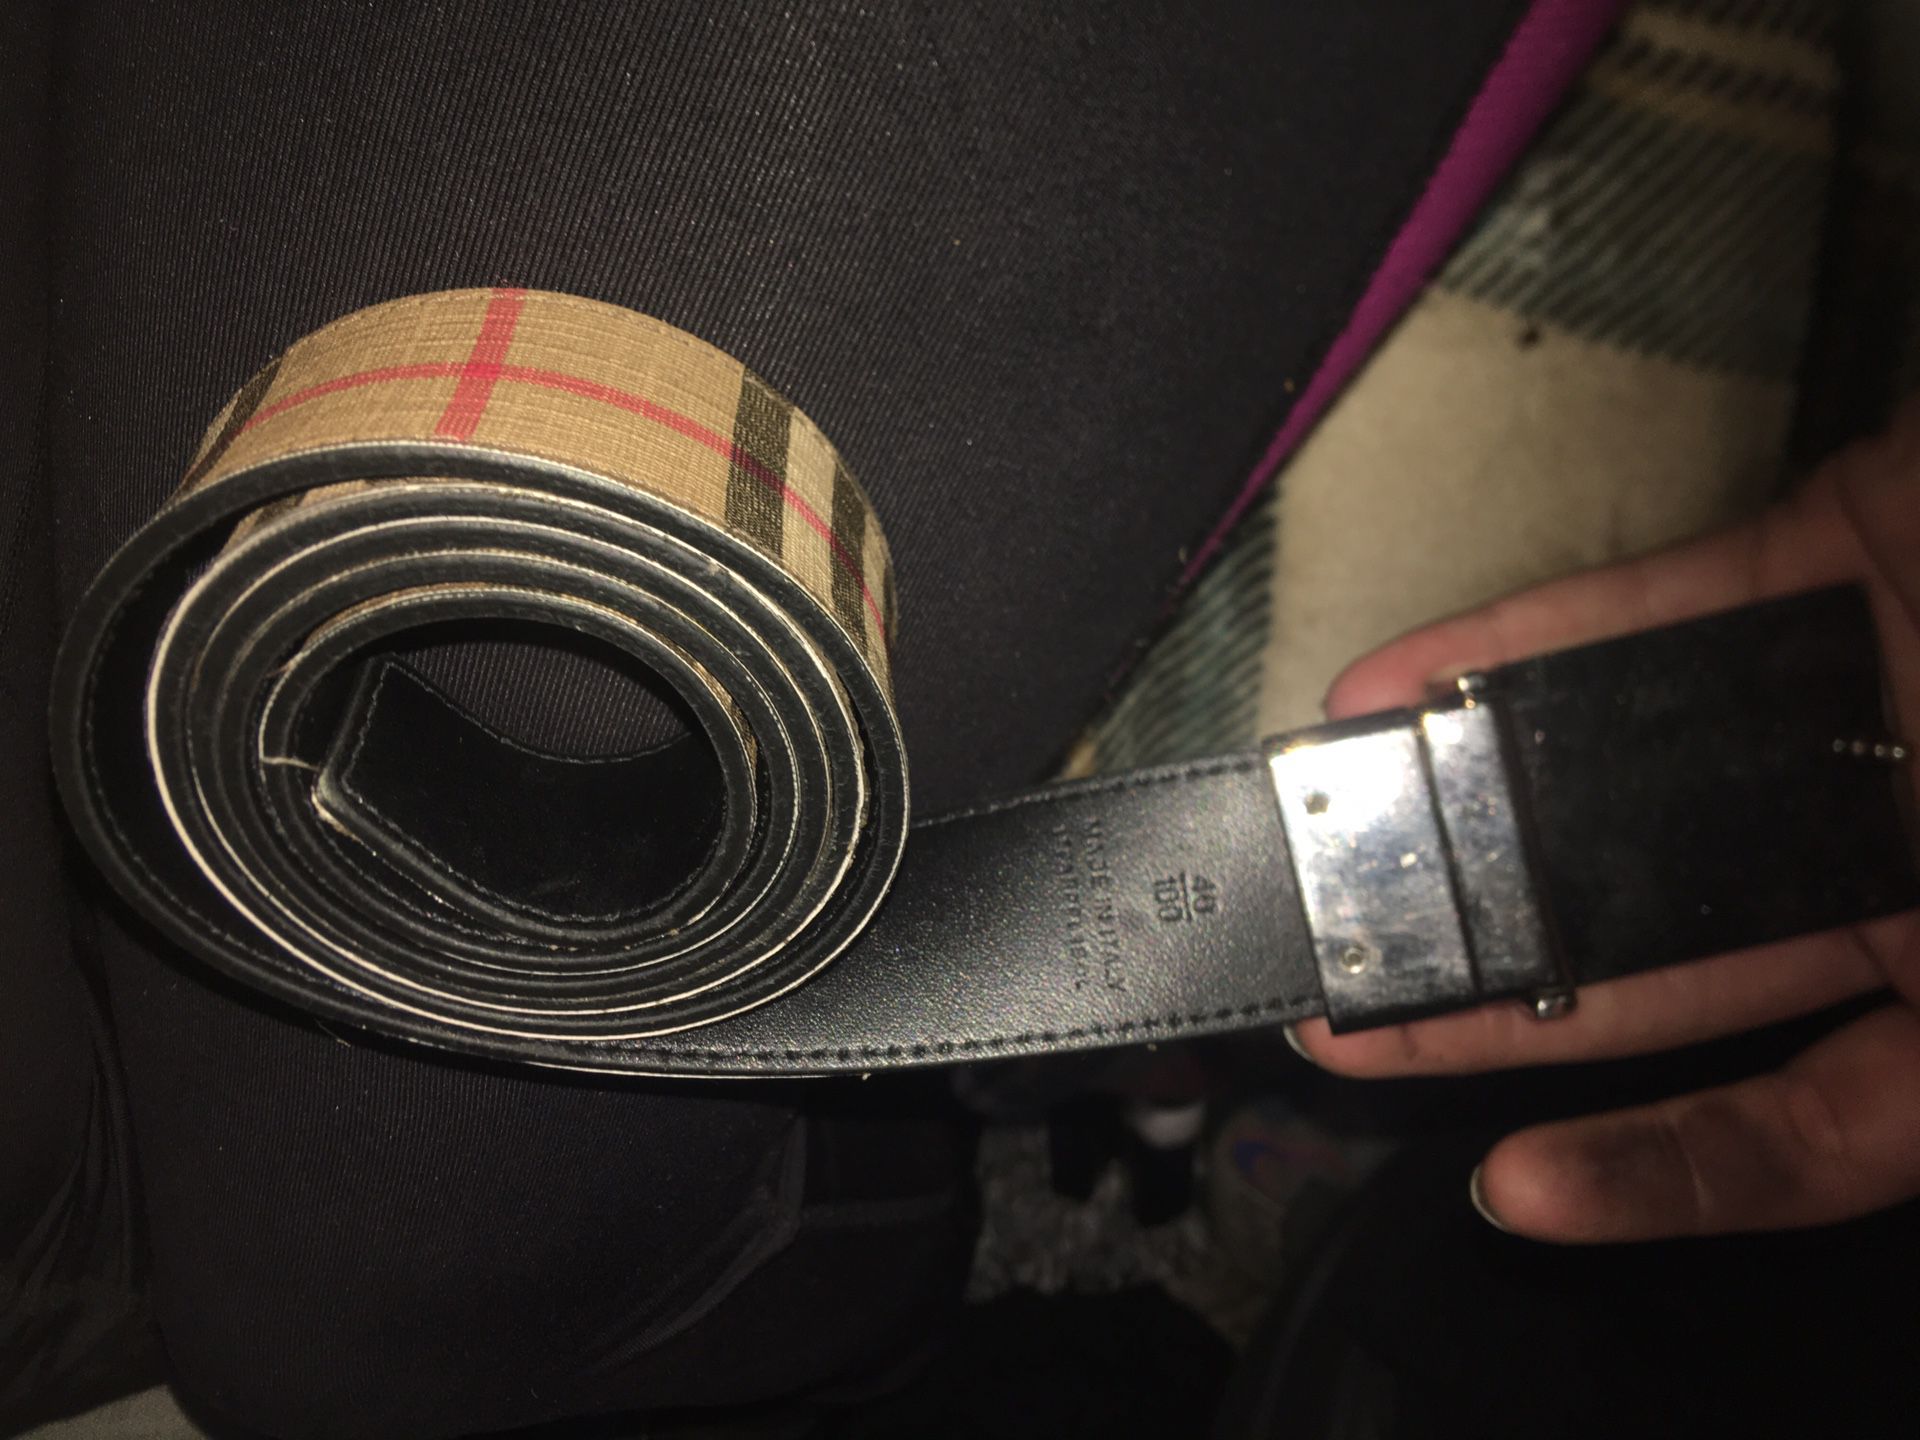 Authentic Burberry Belt Bag for Sale in San Diego, CA - OfferUp